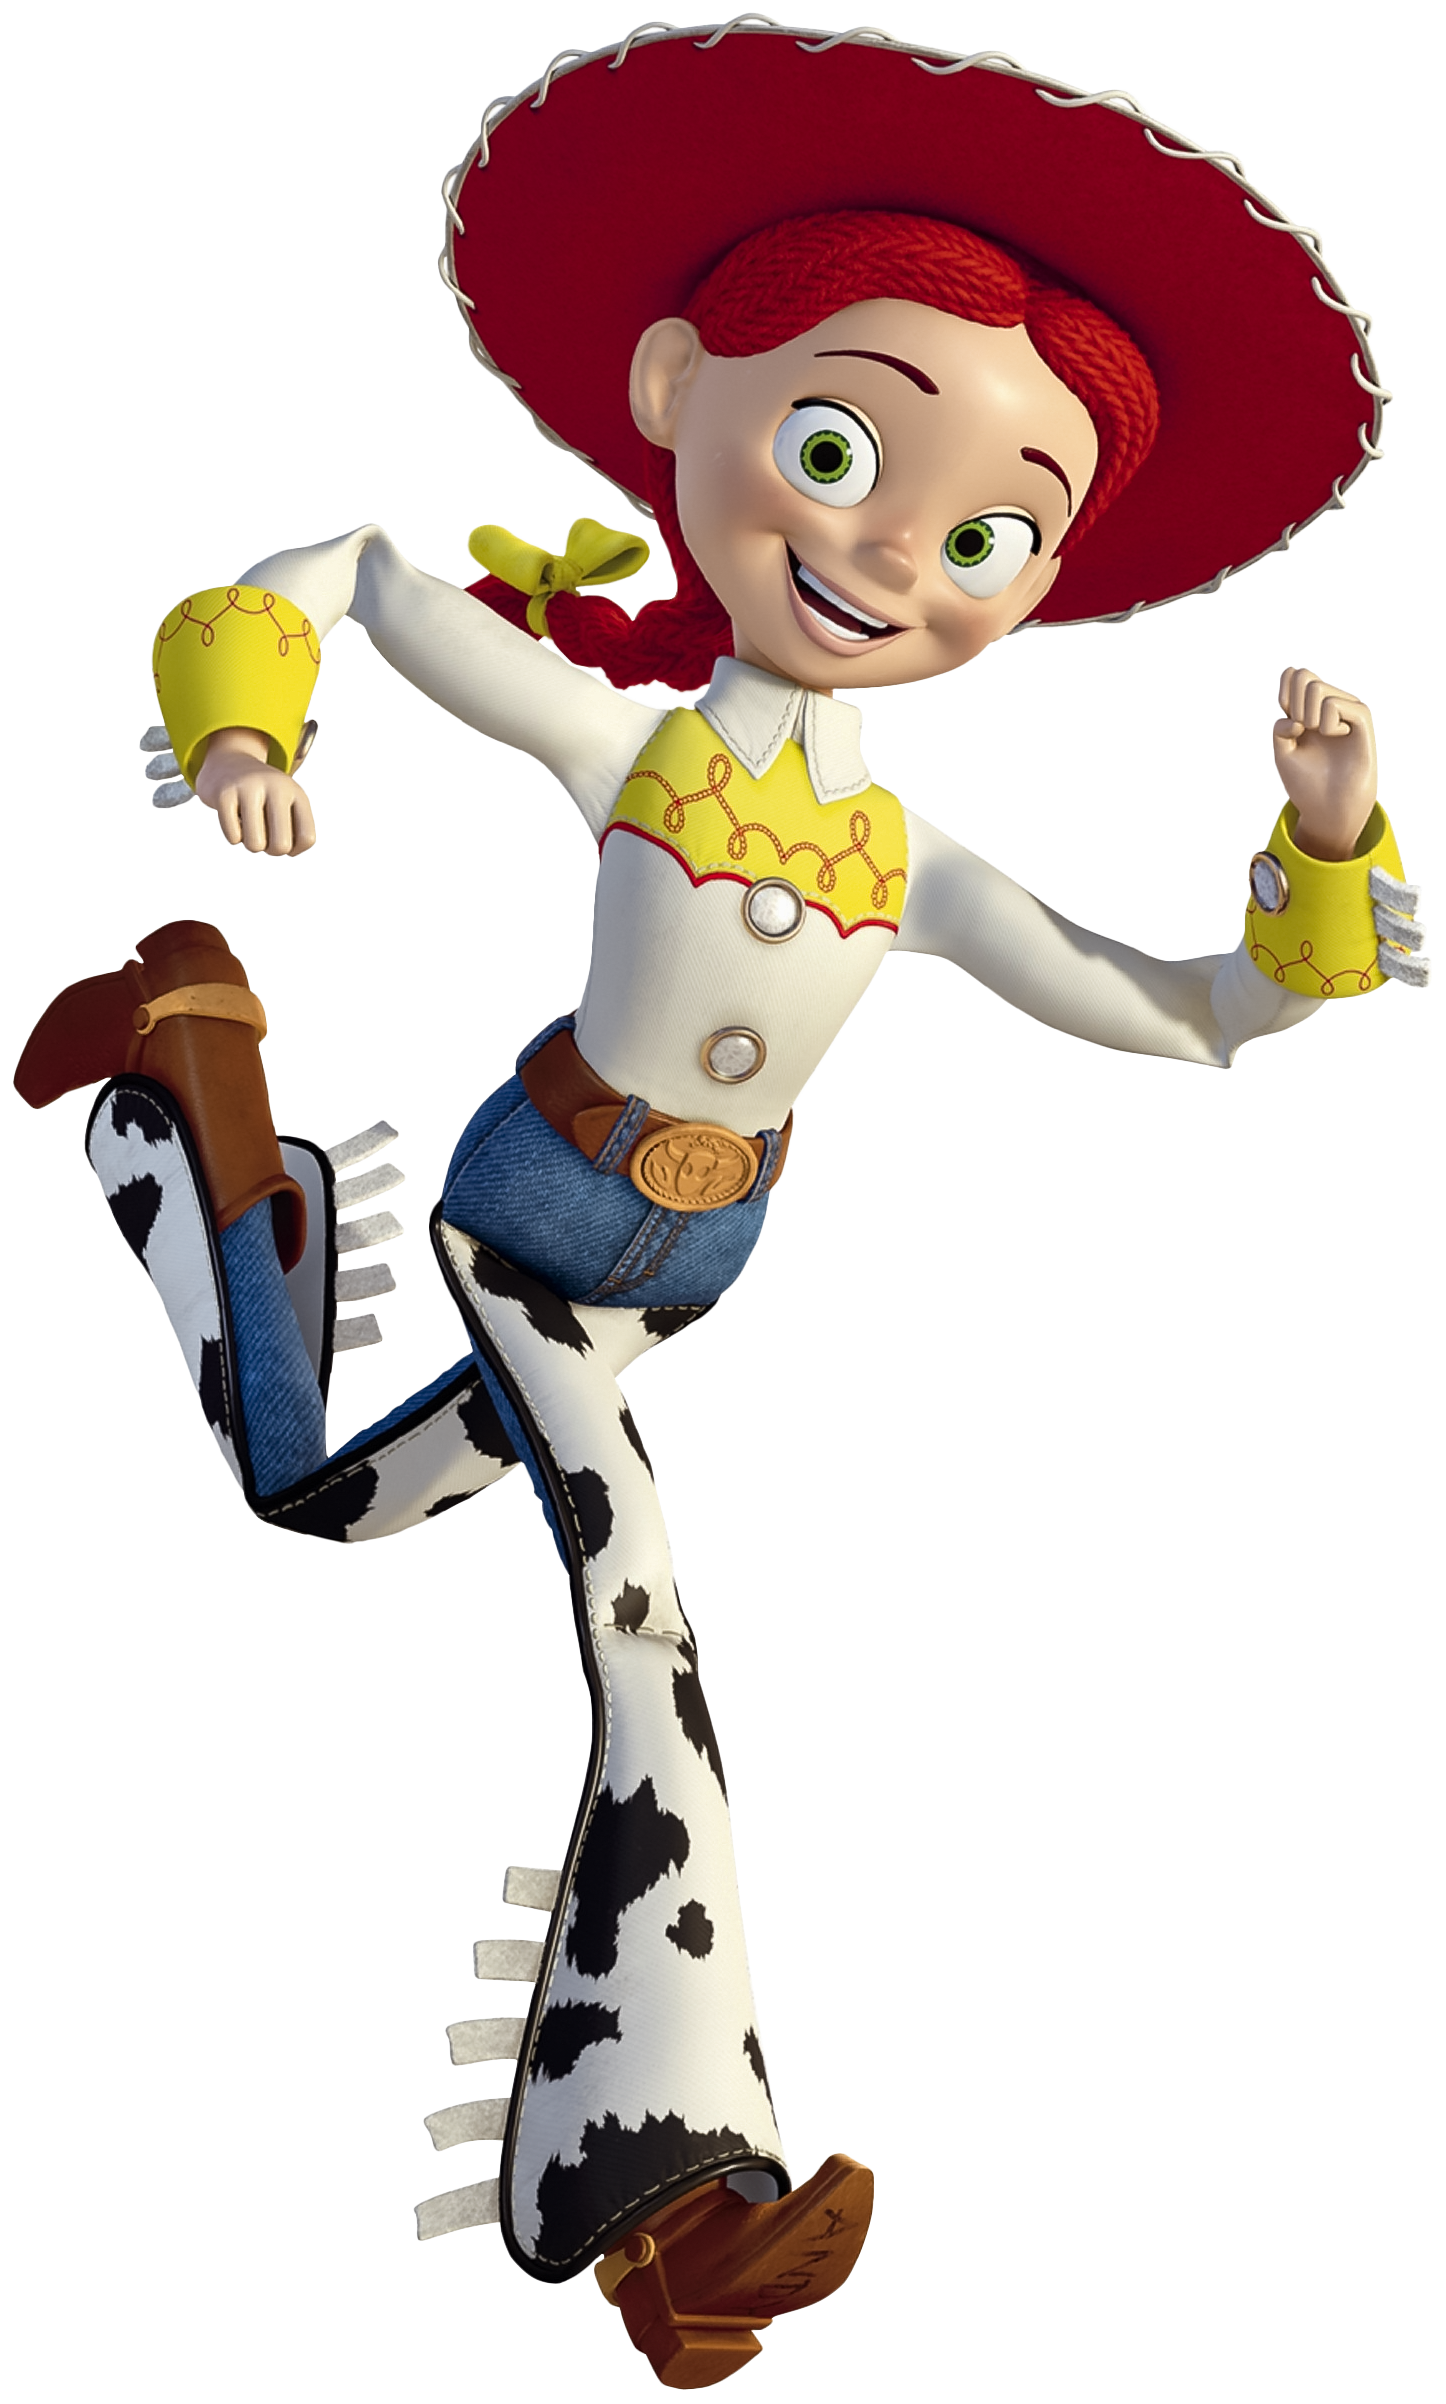 Toy Story Jessie PNG Cartoon Image.